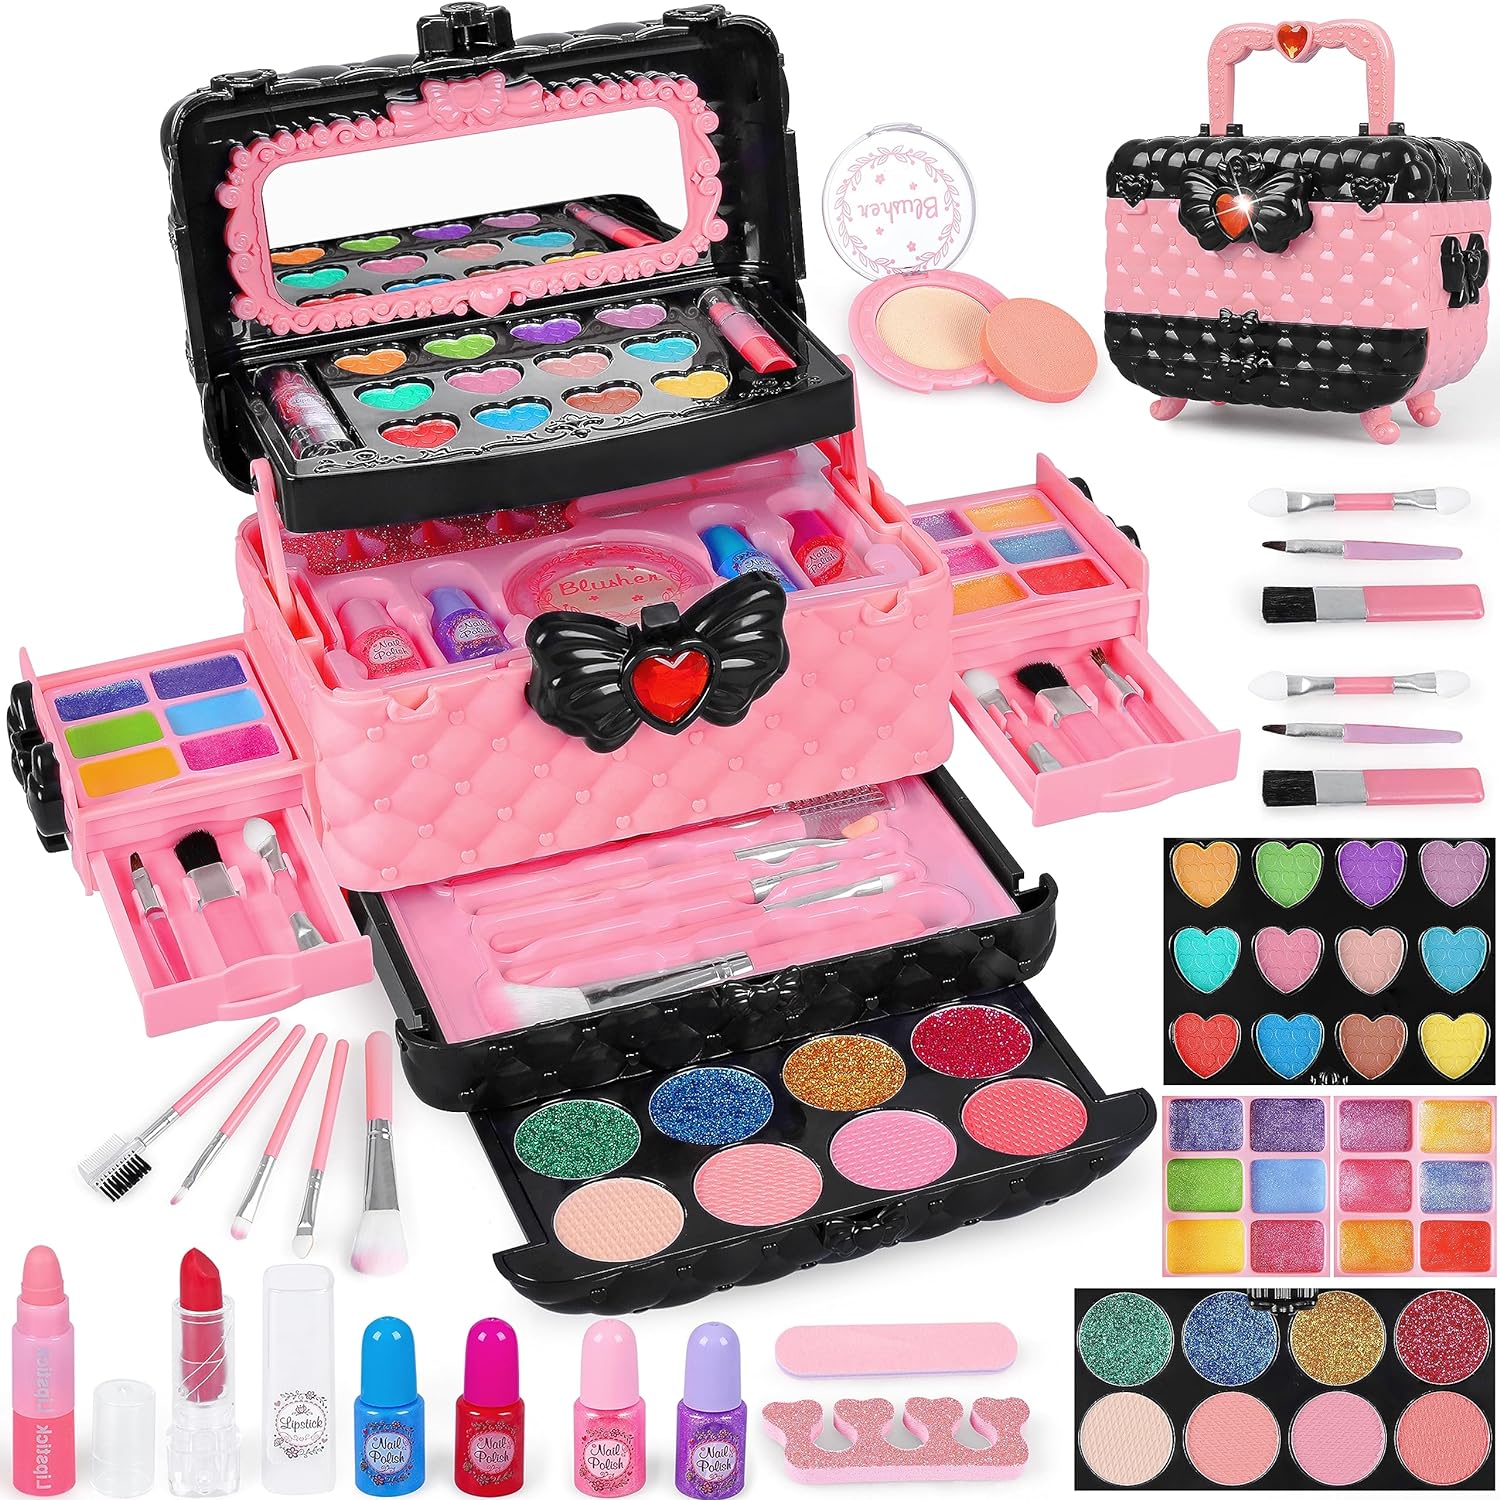 54 Pcs Kids Makeup Kit for Girls, Princess Real Washable Pretend Play Cosmetic Set Toys with Mirror, Non-Toxic & Safe, Birthday Gifts for 3 4 5 6 7 8 9 10 Years Old Girls Kids (Pink)